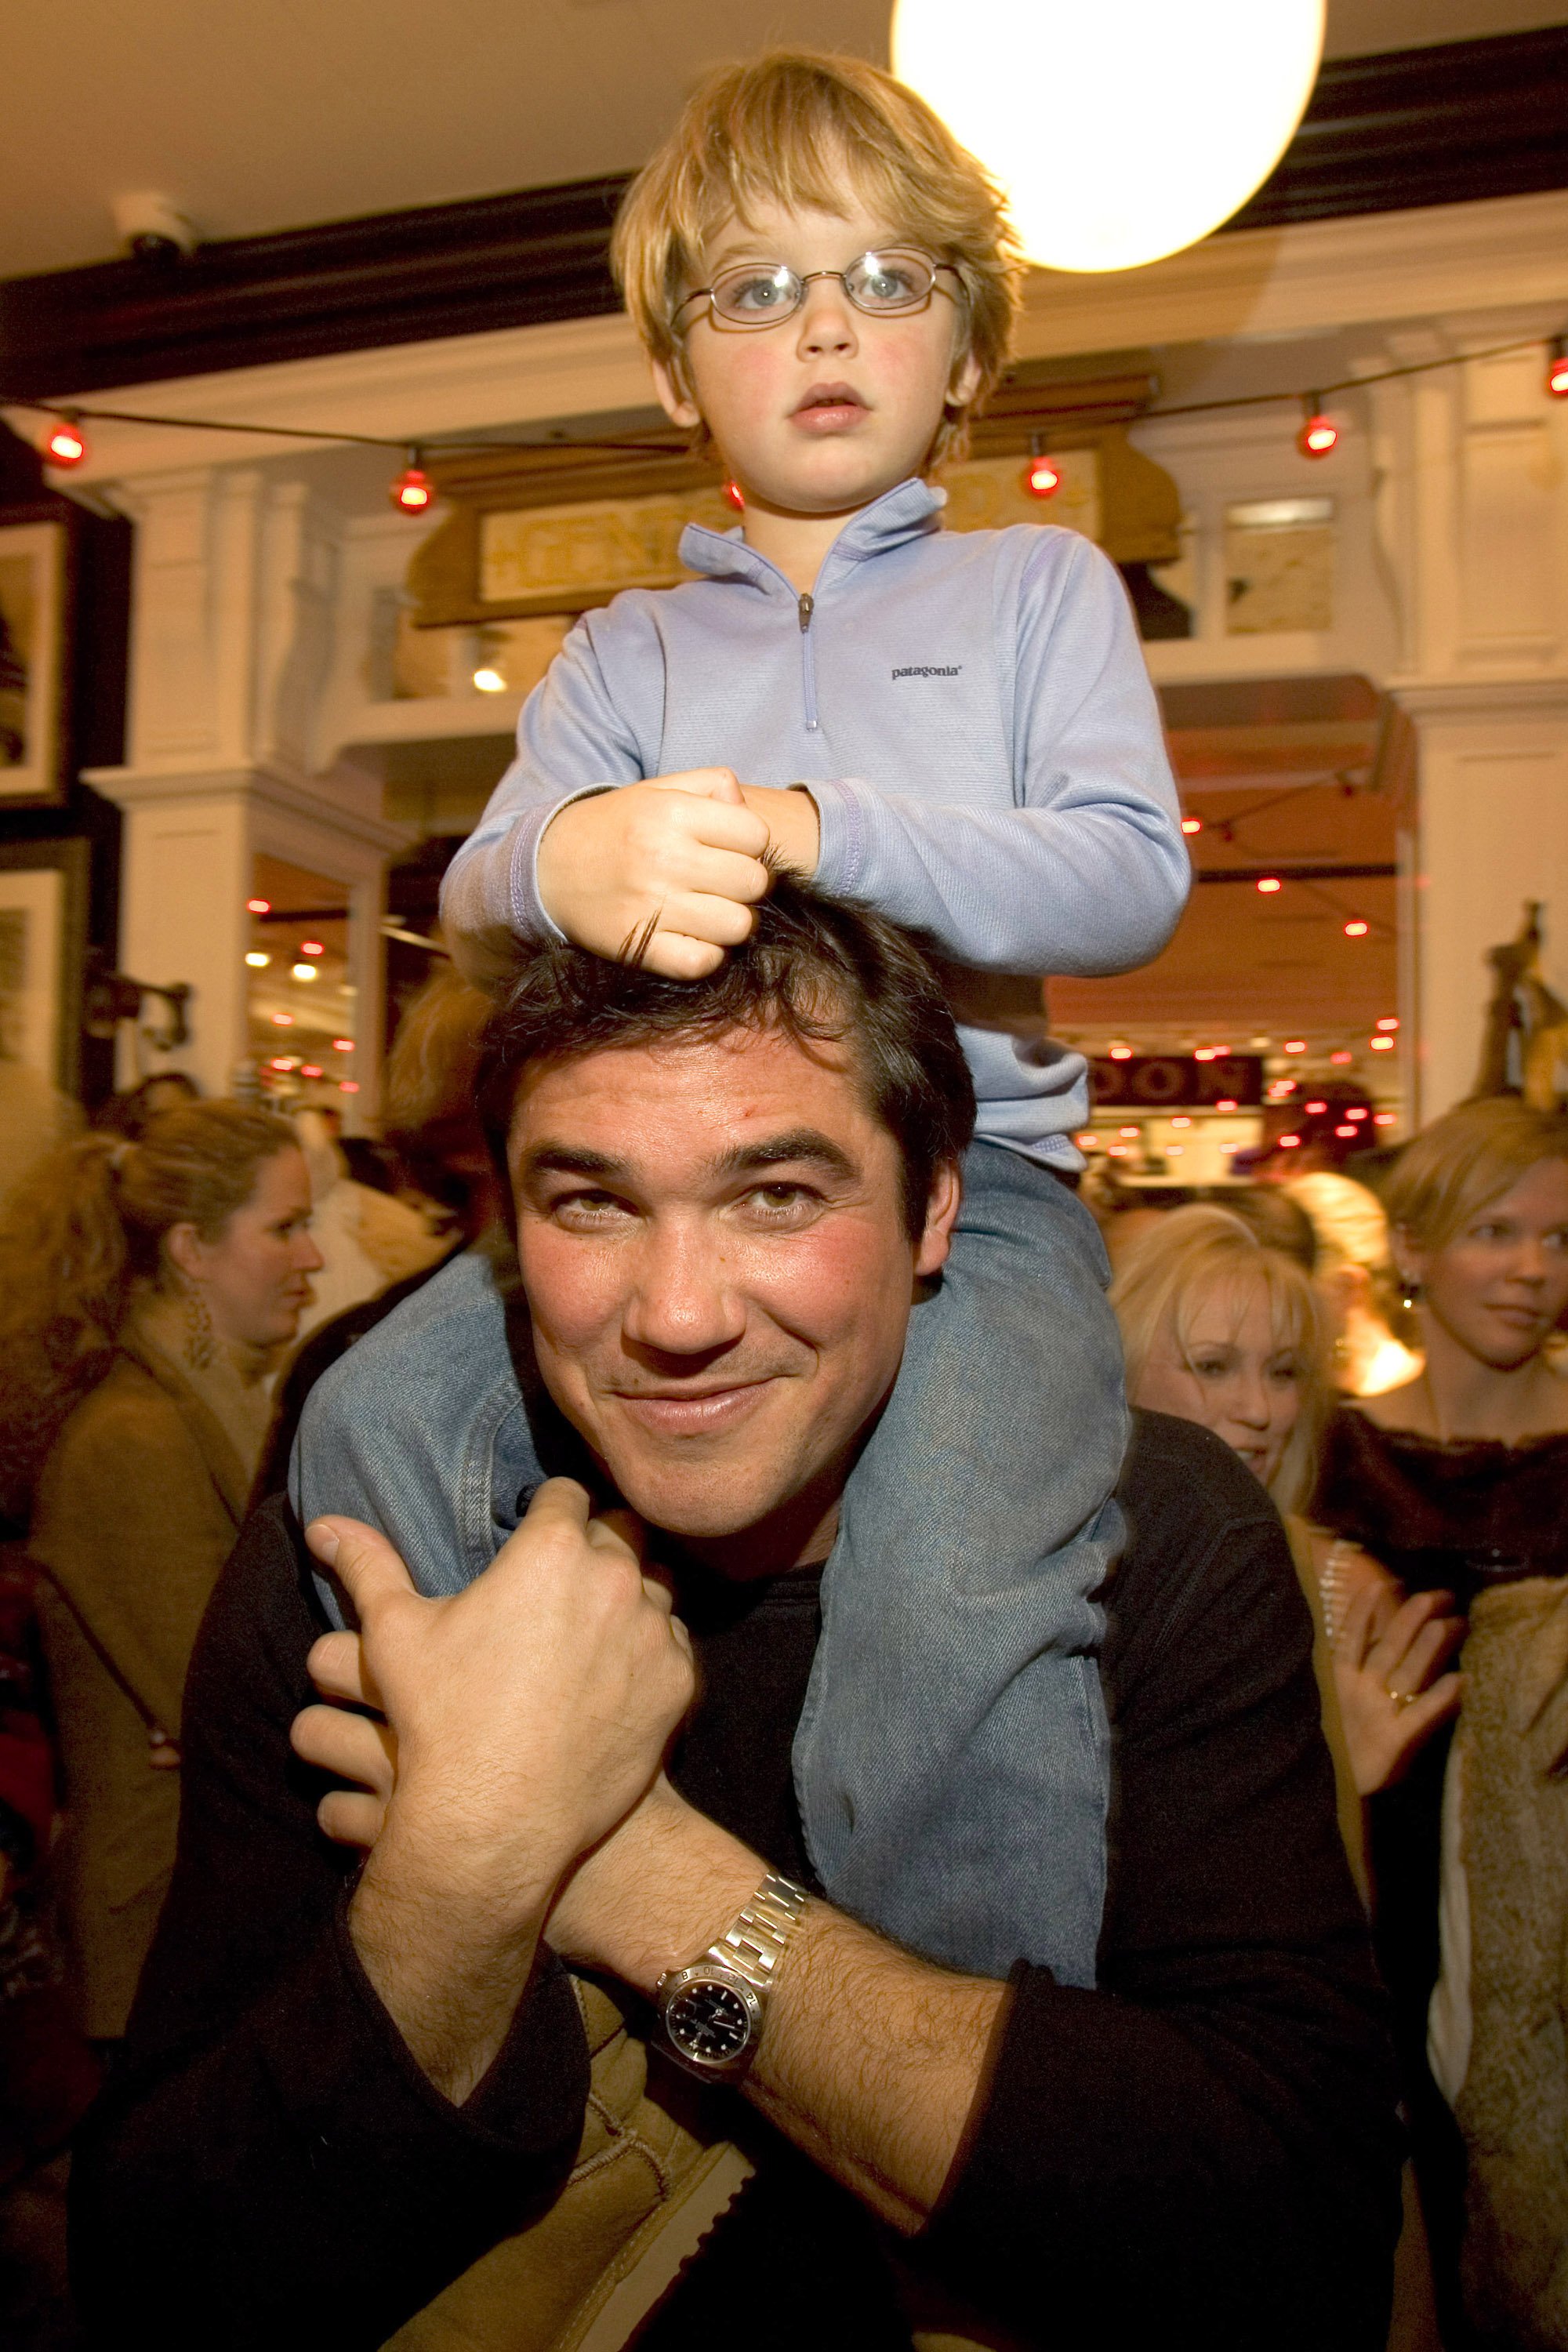 Christopher and Dean Cain during Aspen Peak at the Opening of The New Ralph Lauren Aspen Store in Colorado on December 30, 2004 | Source: Getty Images